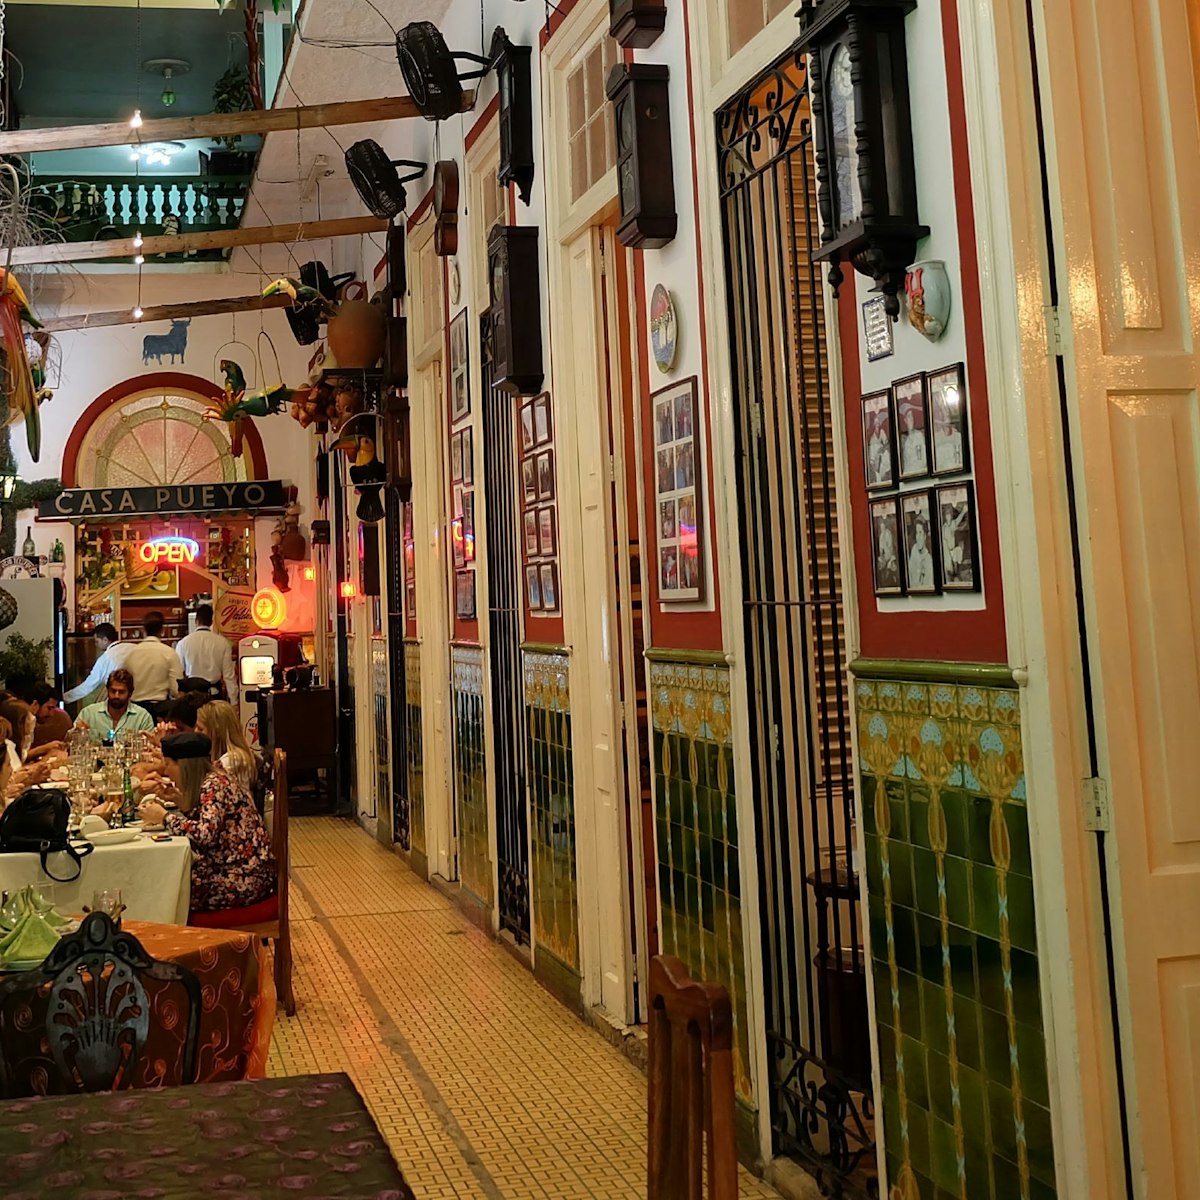 Restaurante San Cristóbal’s interior decoration is fully loaded with old photos, posters, signs, artifacts and animal skins.